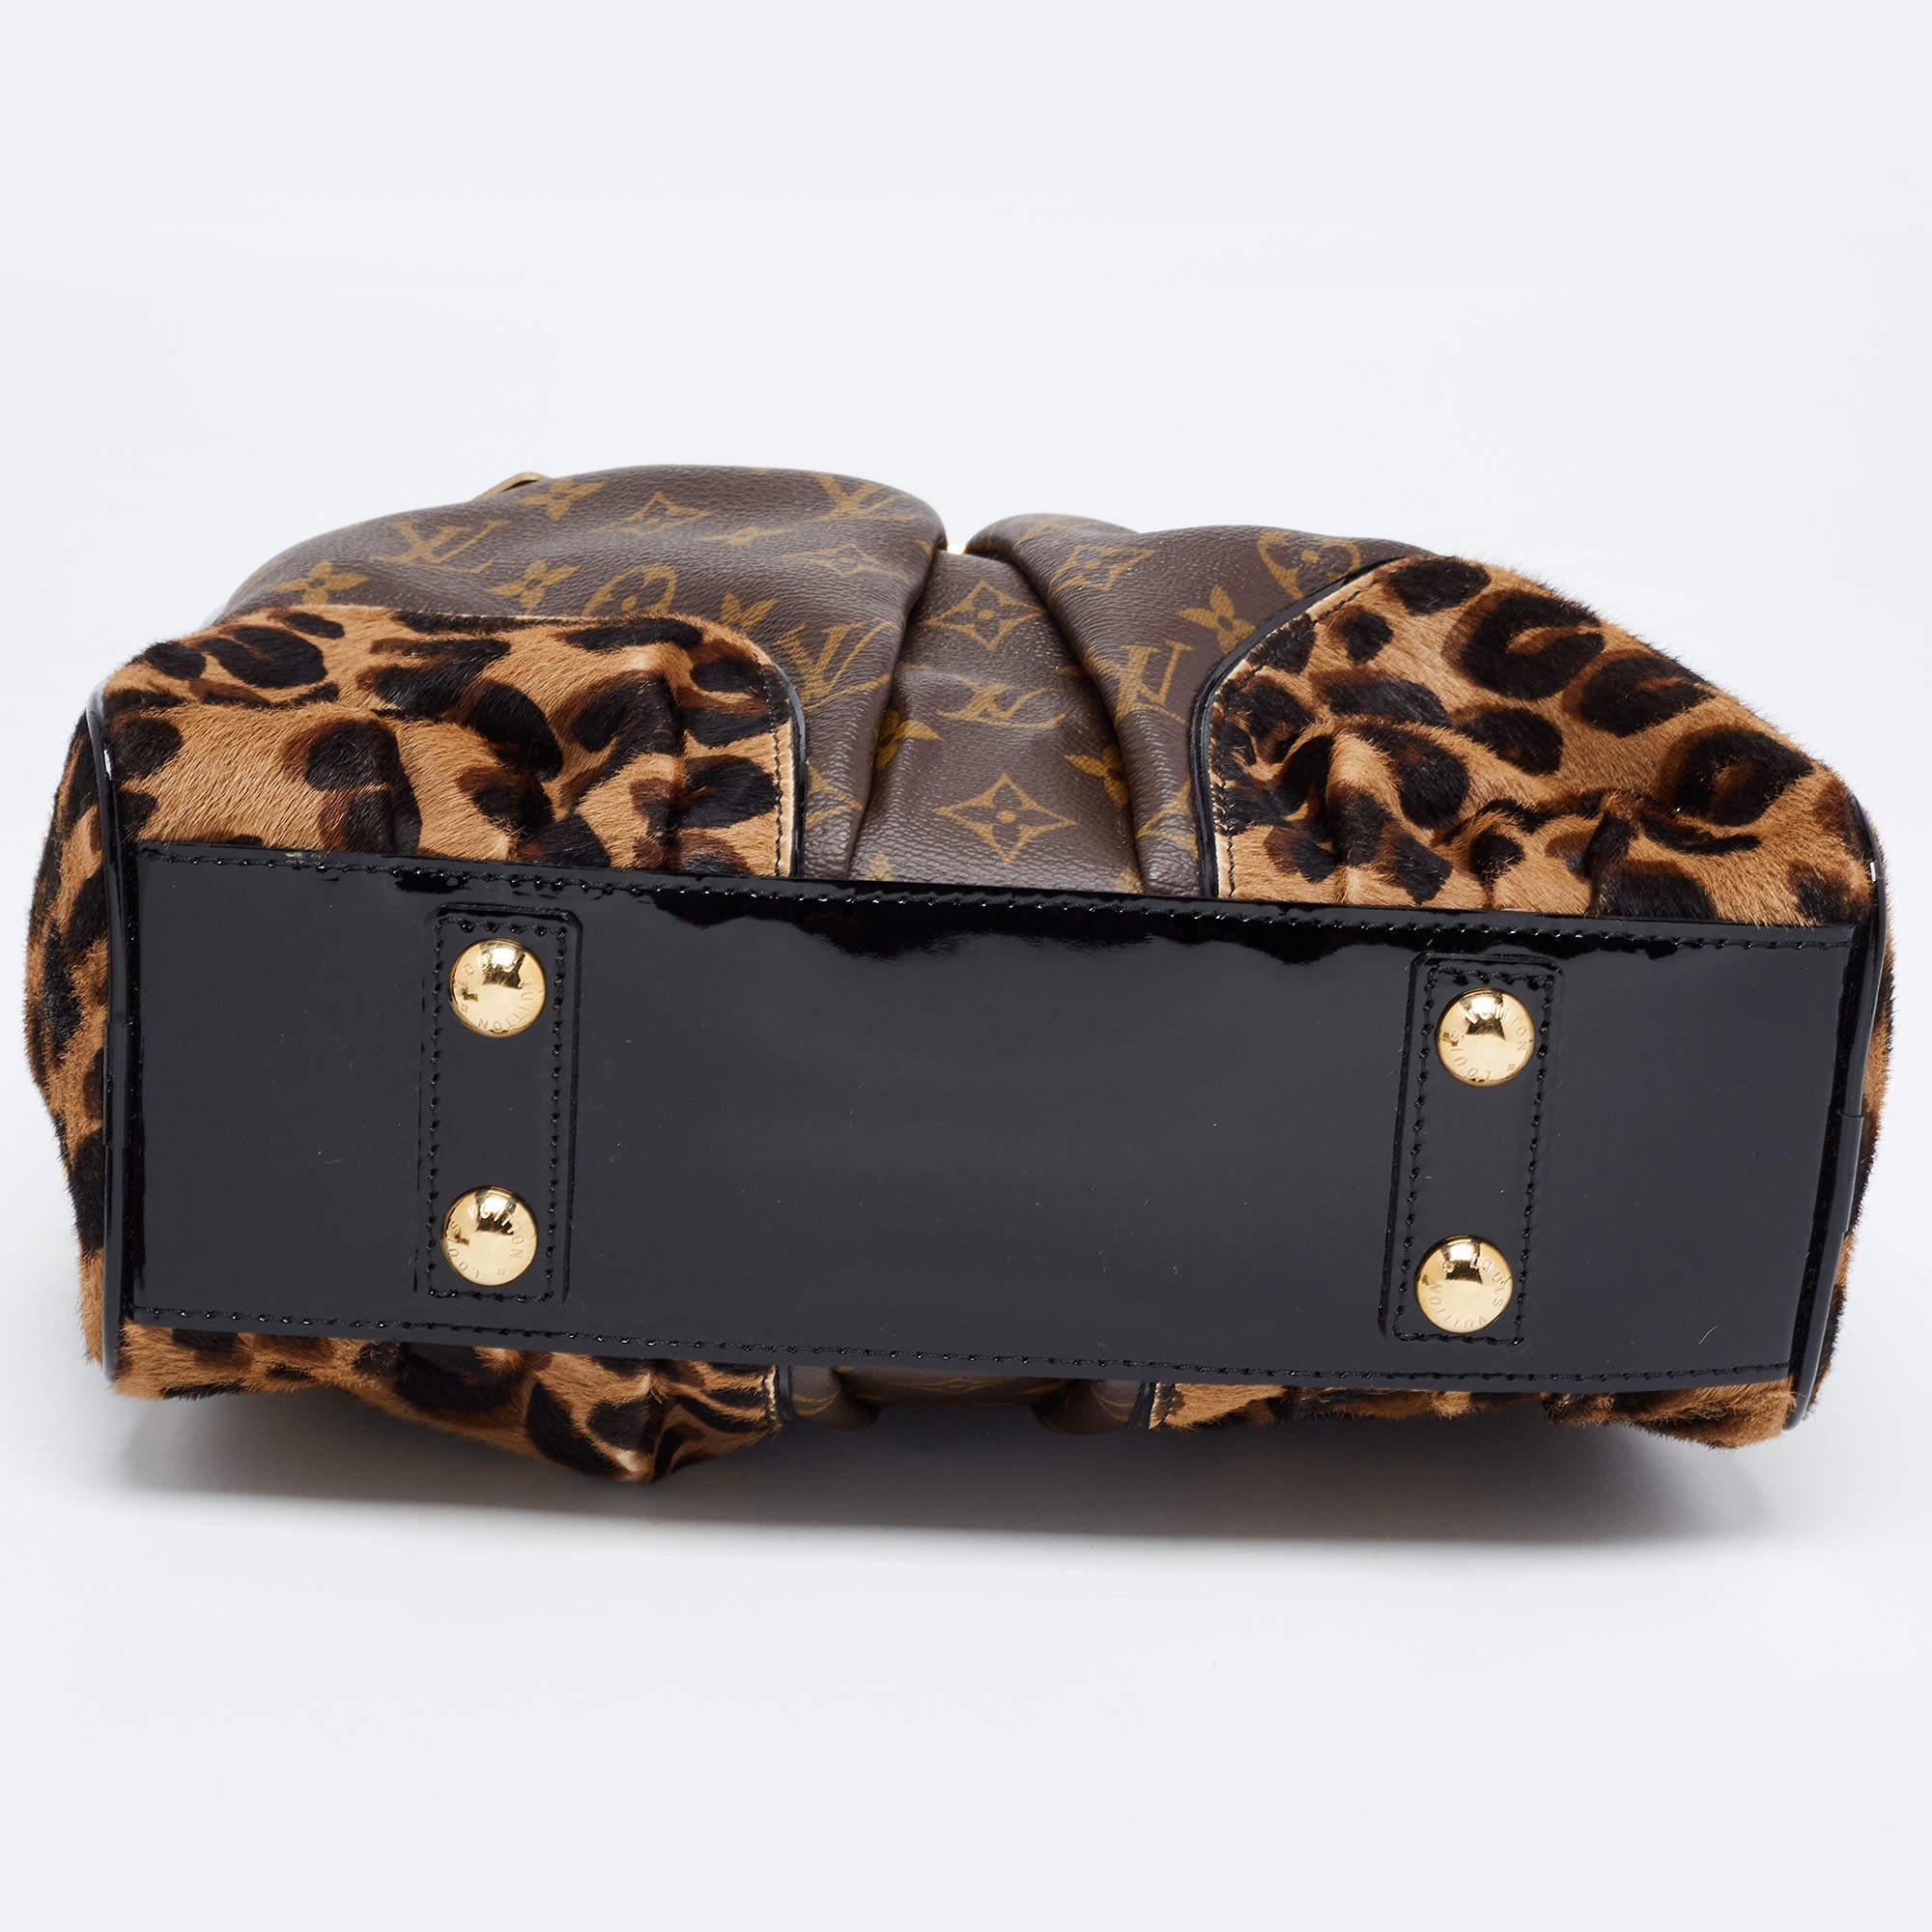 Women's Louis Vuitton Monogram Canvas, Leopard Calfhair and Karung Trimmed Adele Bag For Sale